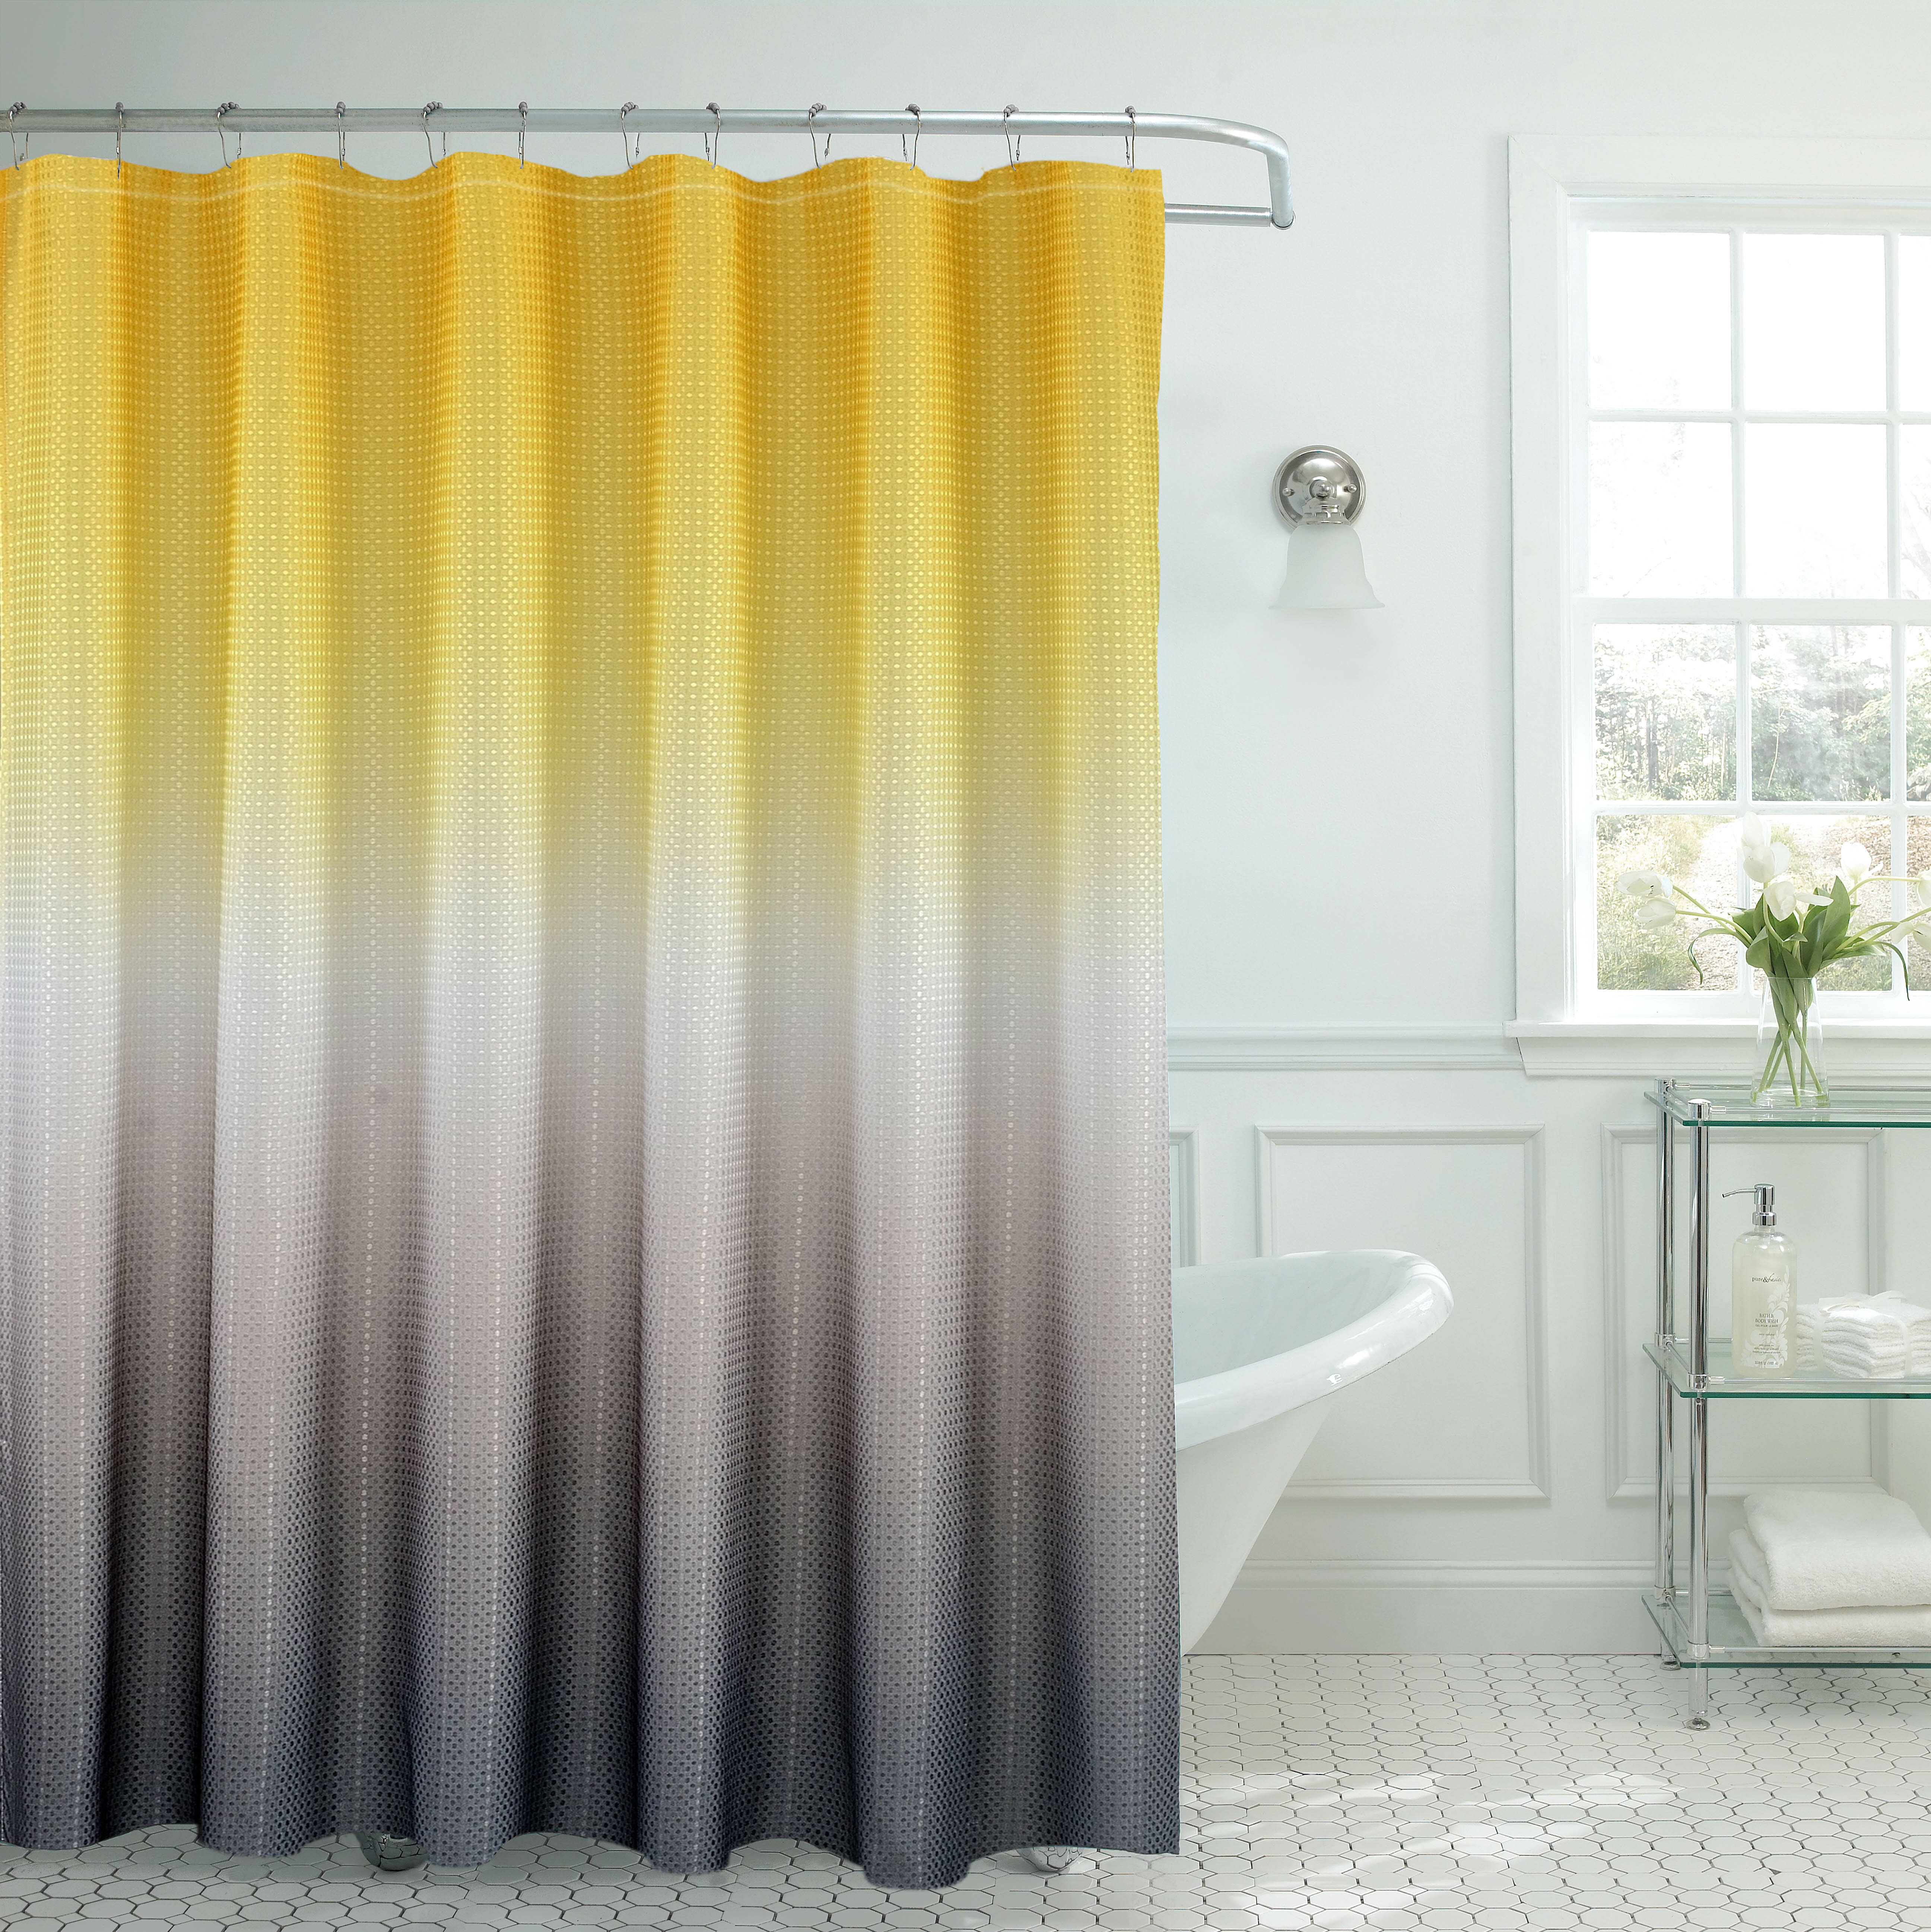 Ebern Designs Rohando Ombre Shower Curtain with Hooks Included